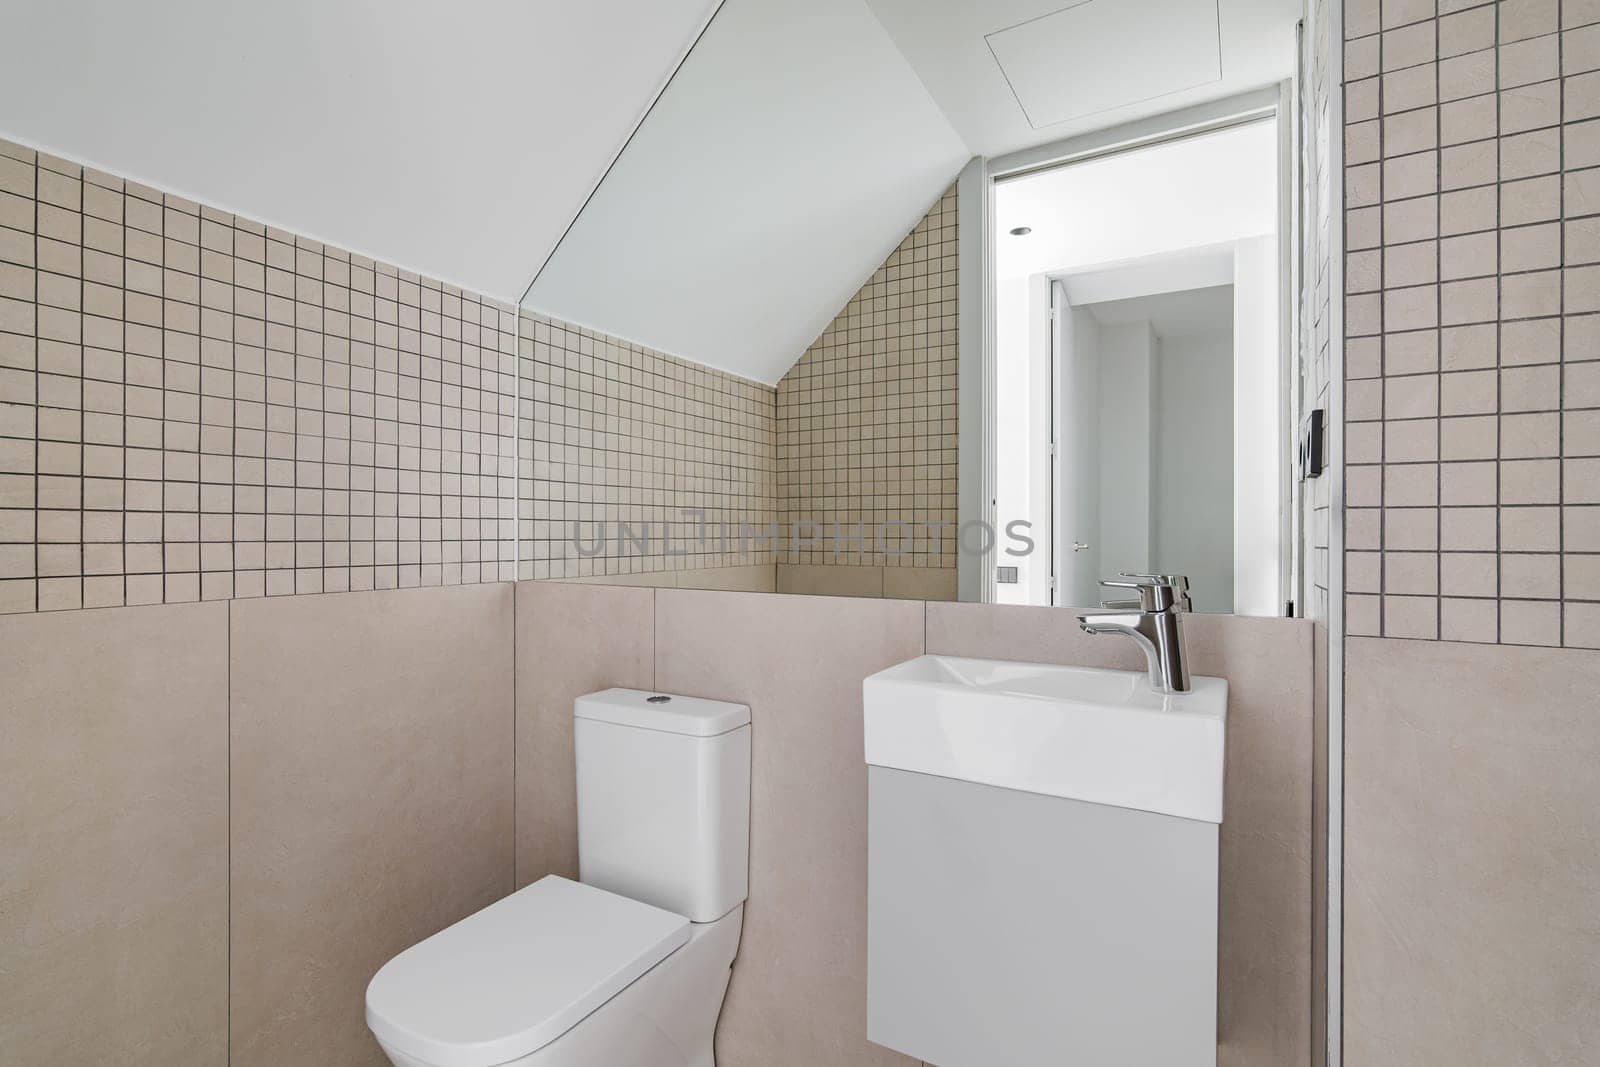 Interior of modern bathroom with beige tiles, toilet and small sink.